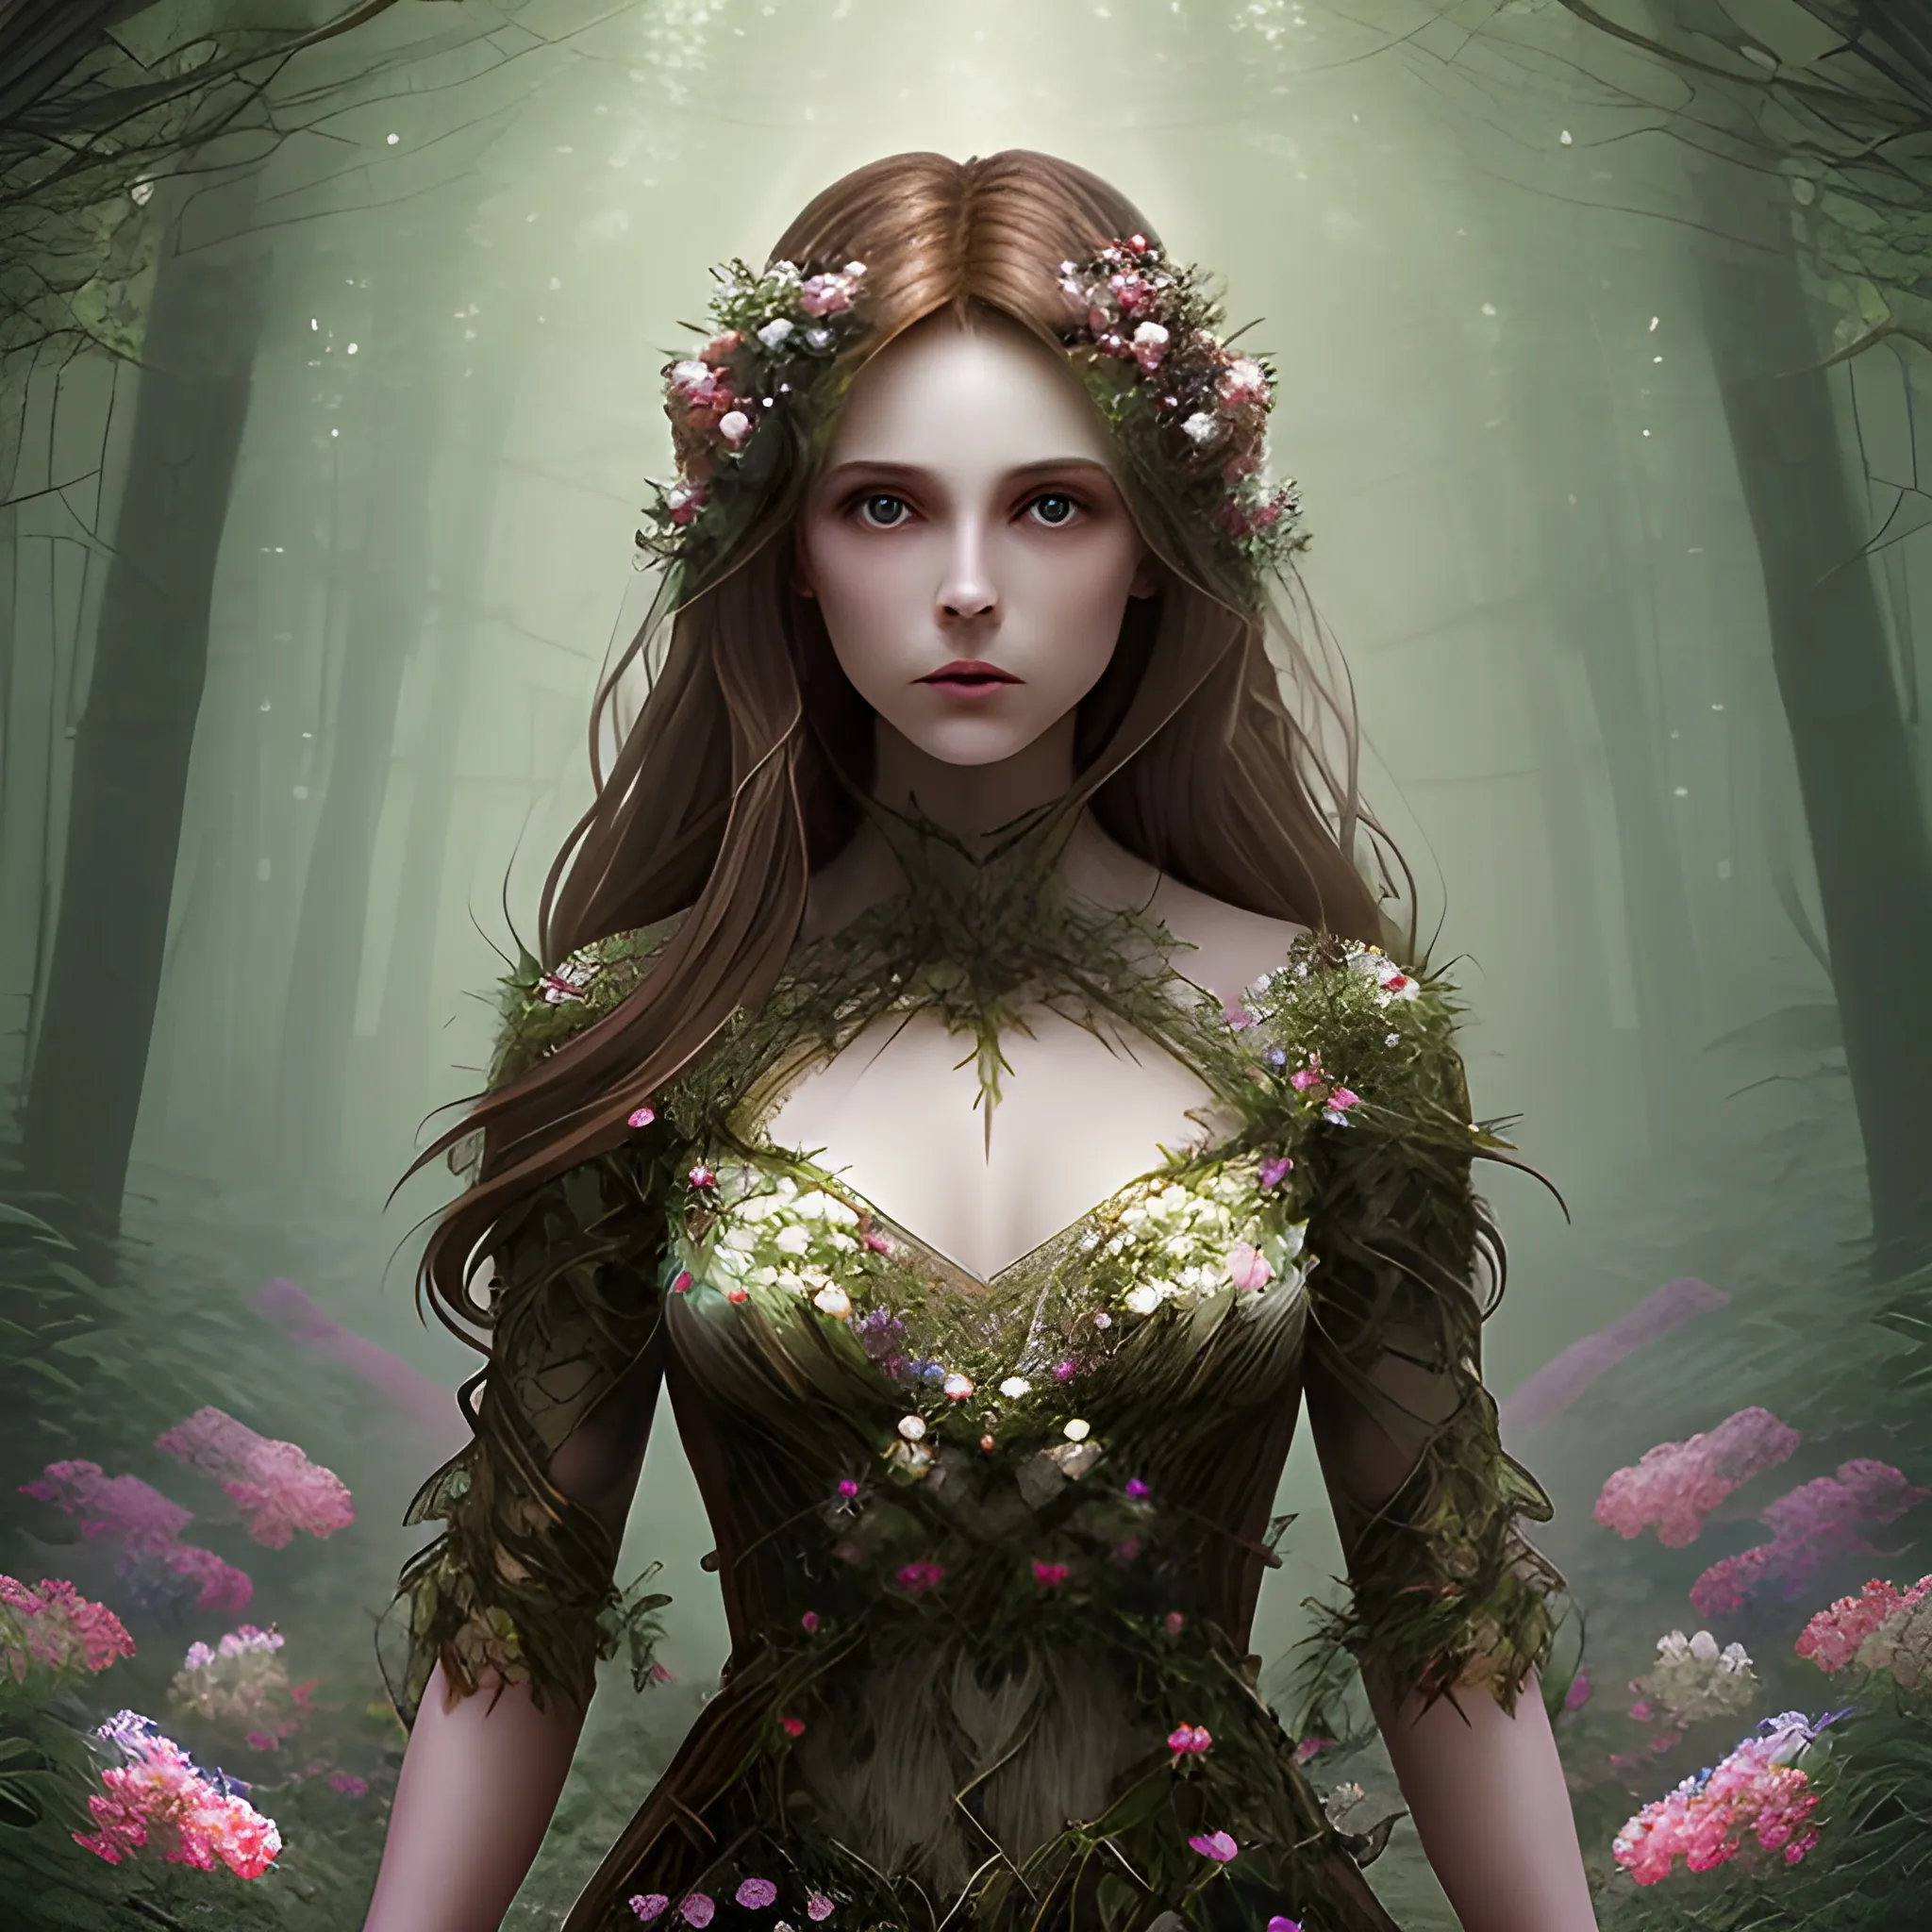 Stable Diffusion 1.5. Masterpiece, beautiful brown hair woman, wearing a tight dress made of light, in fantasy forest, surrounded by flowers, forest has a sense of mystery, godrays, ultra detailed, moody